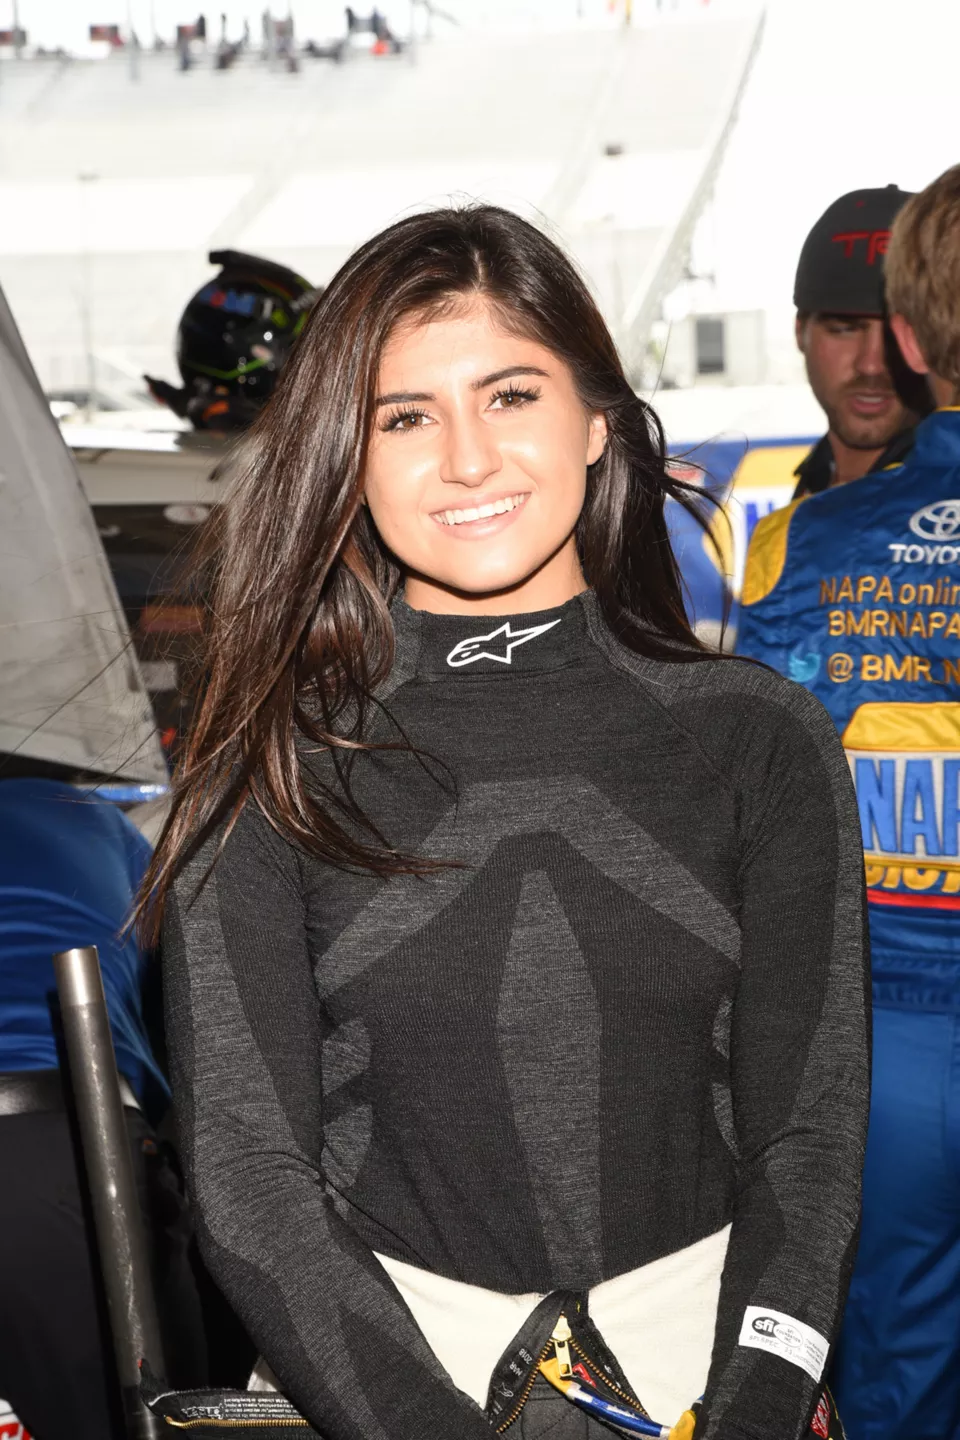 Get To Know Hailie Deegan Who Really Likes To Race